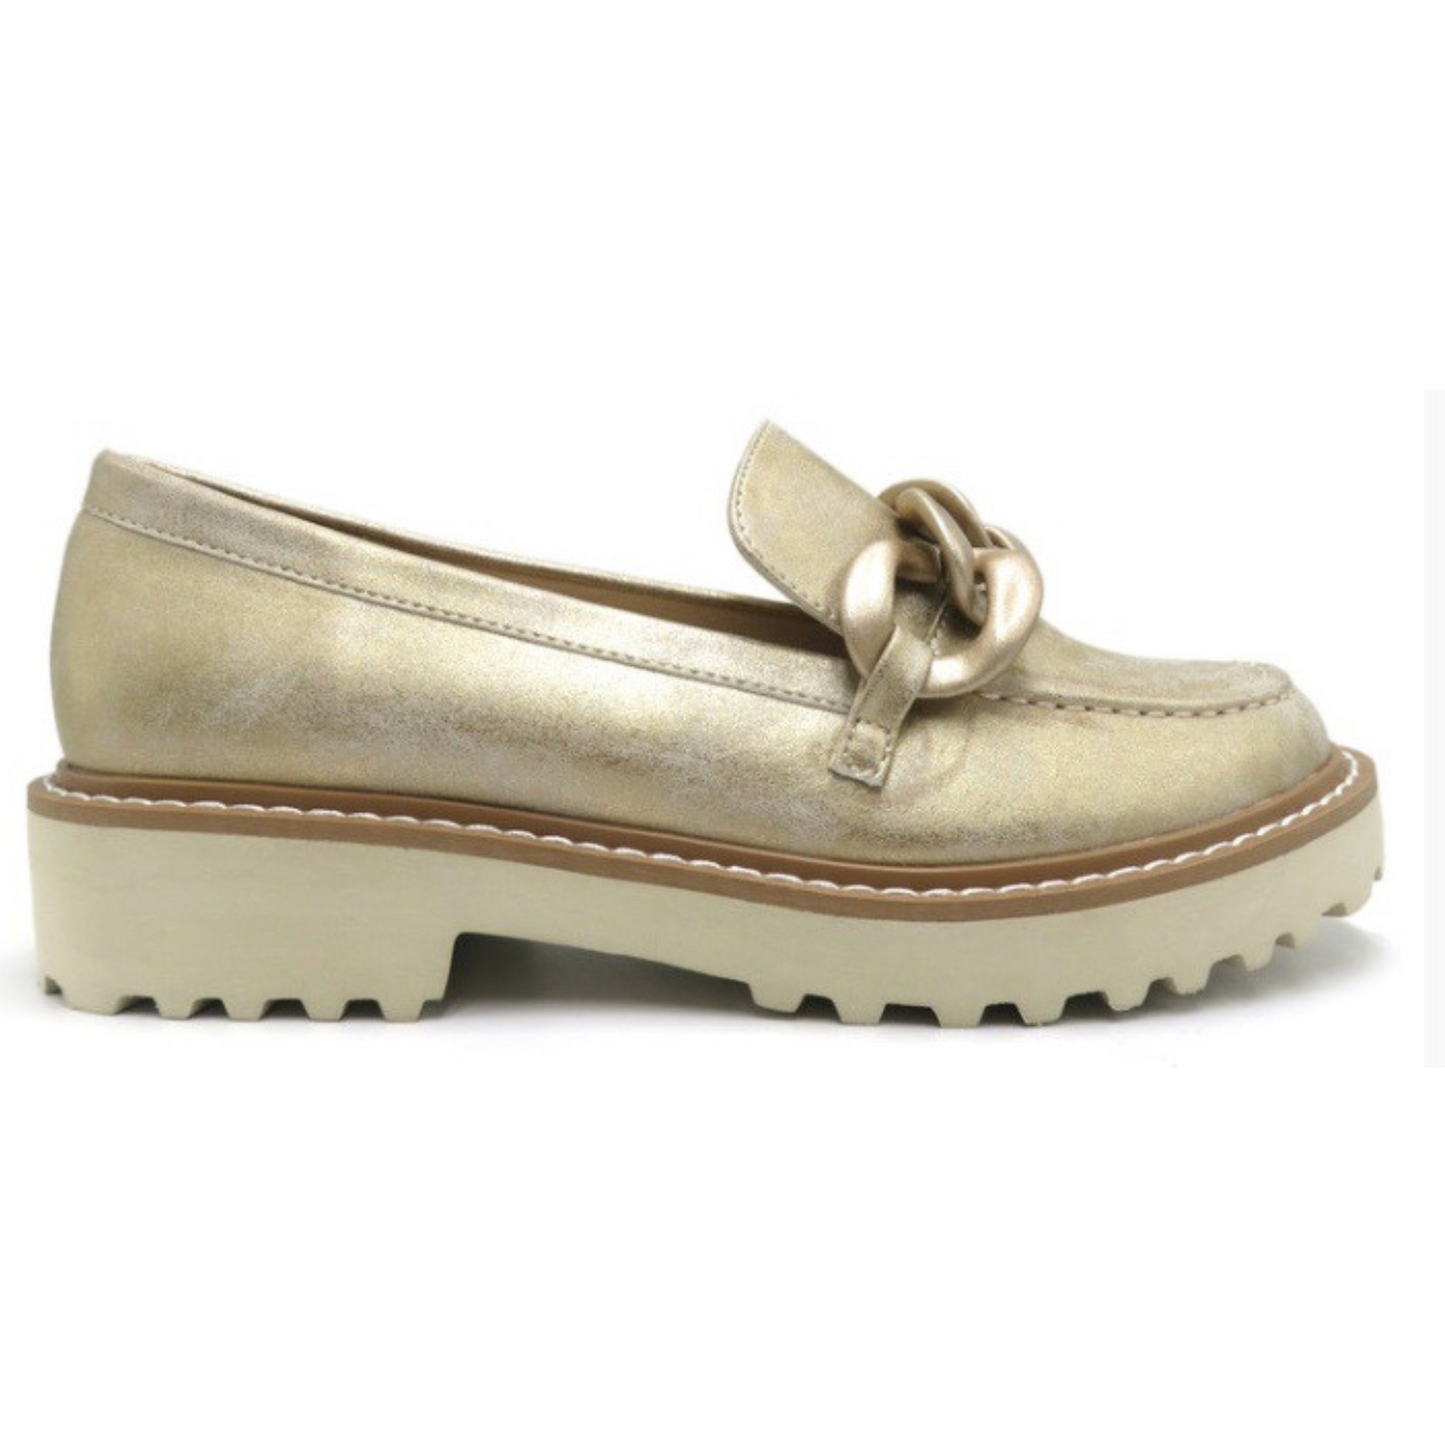 Mora-2 is a stylish closed-toe shoe featuring a gold-toned upper and elegant faux chain accent. Durable and comfortable, you can wear it for any occasion.